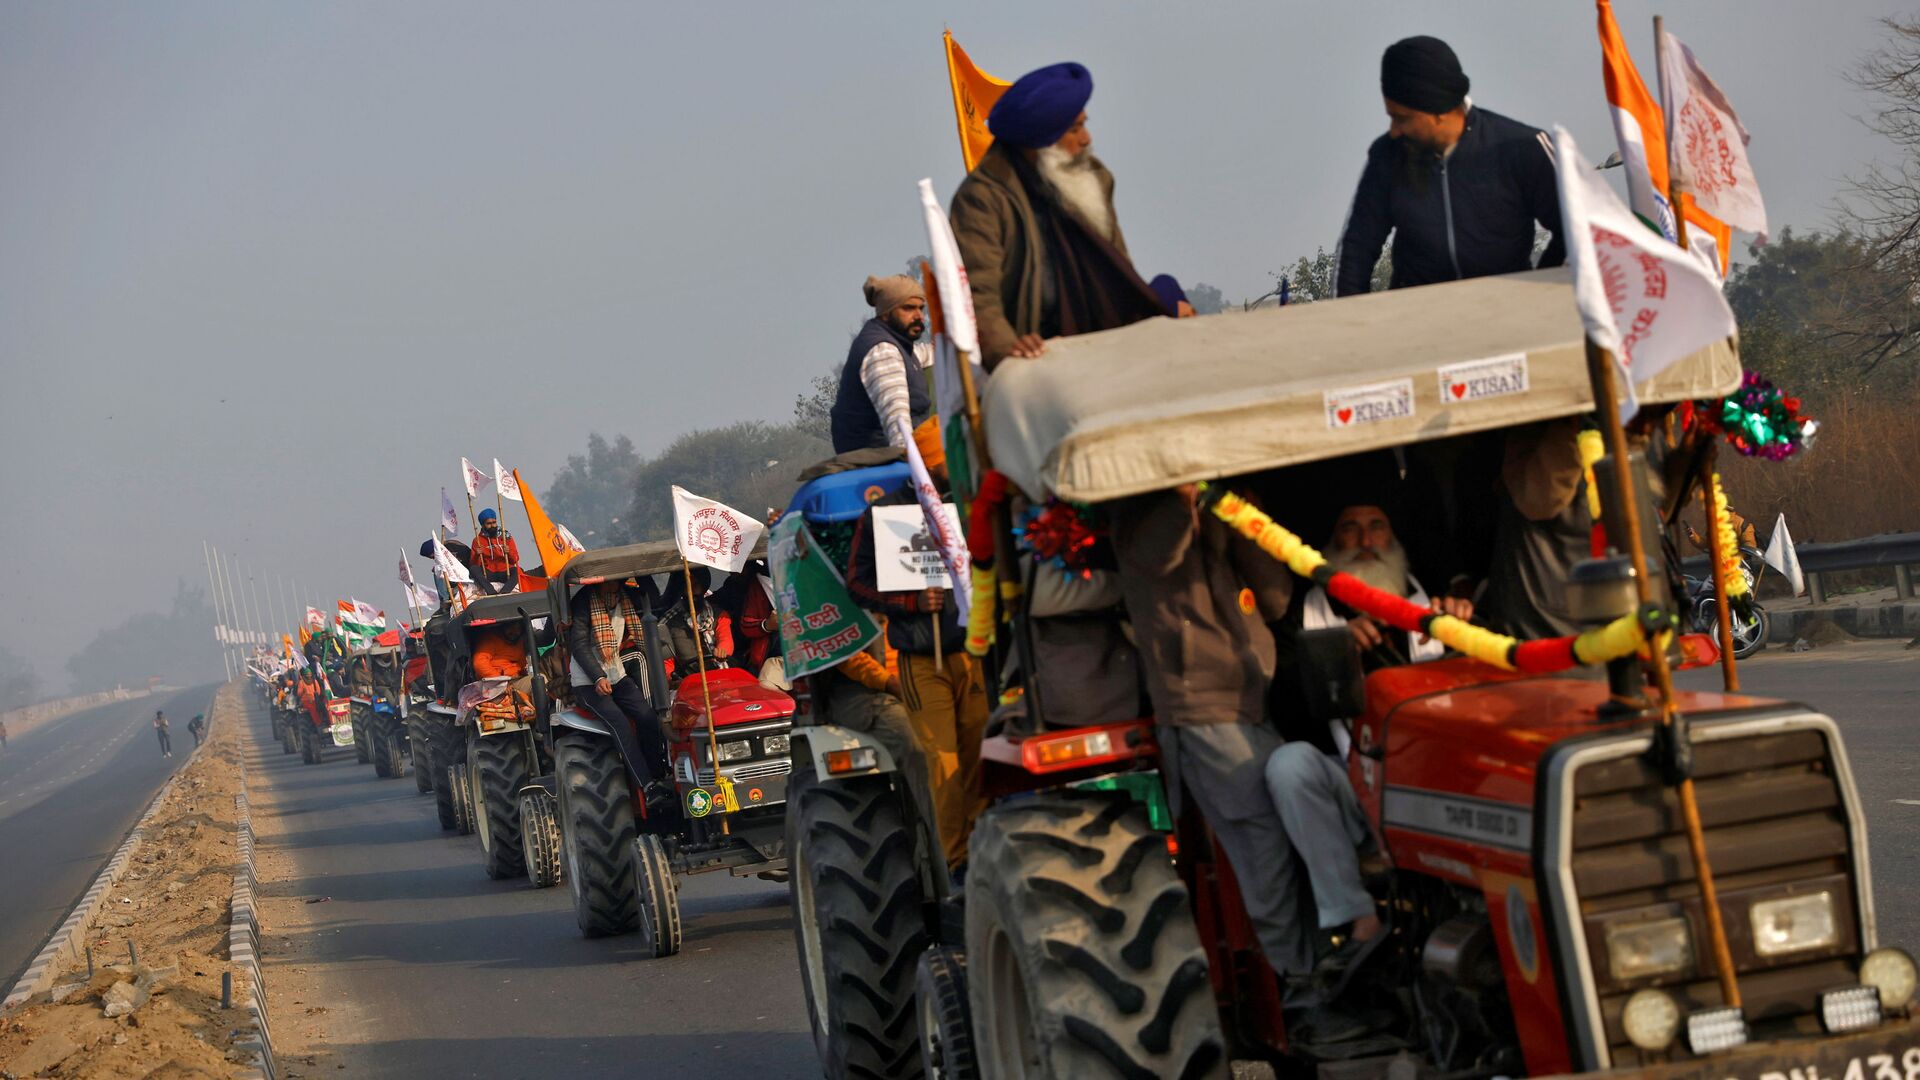 Farmers take part in a tractor rally to protest against farm laws on the occasion of India's Republic Day in Delhi, India, January 26, 2021 - Sputnik International, 1920, 24.09.2021